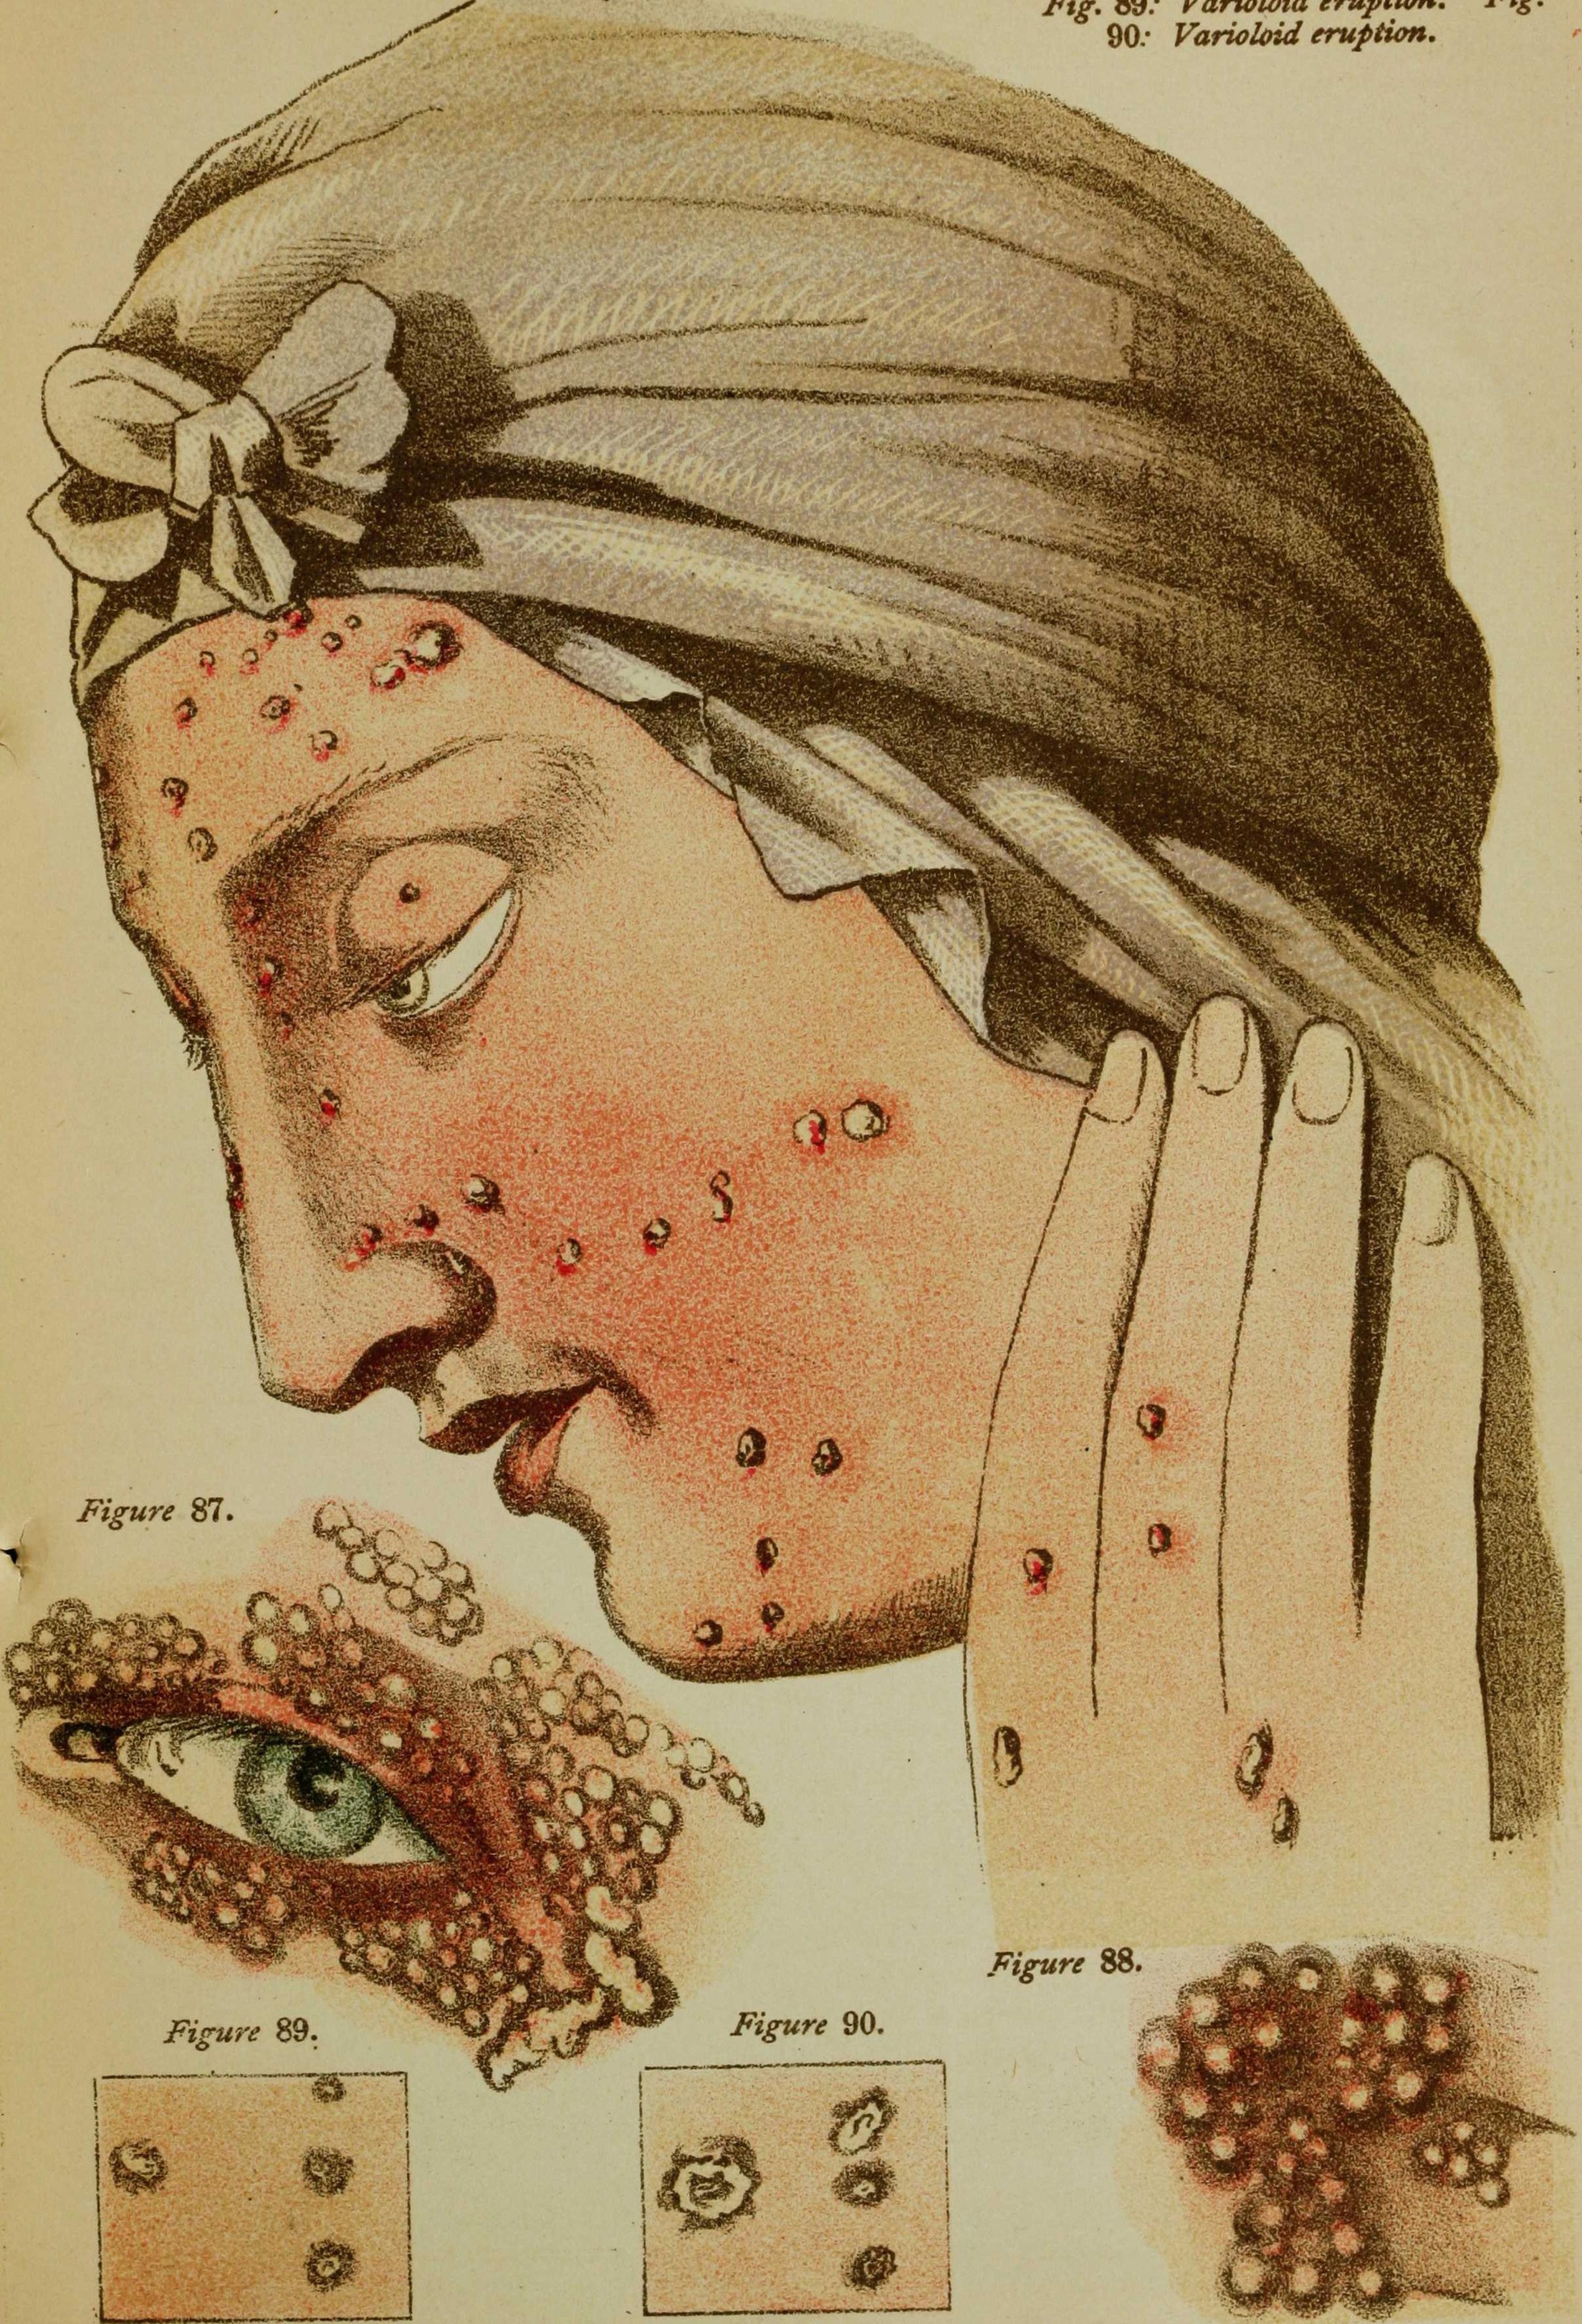 An illustration depicting smallpox pustules on the face and hand of a woman. Photo: Smith Collection/Gado/Getty Images